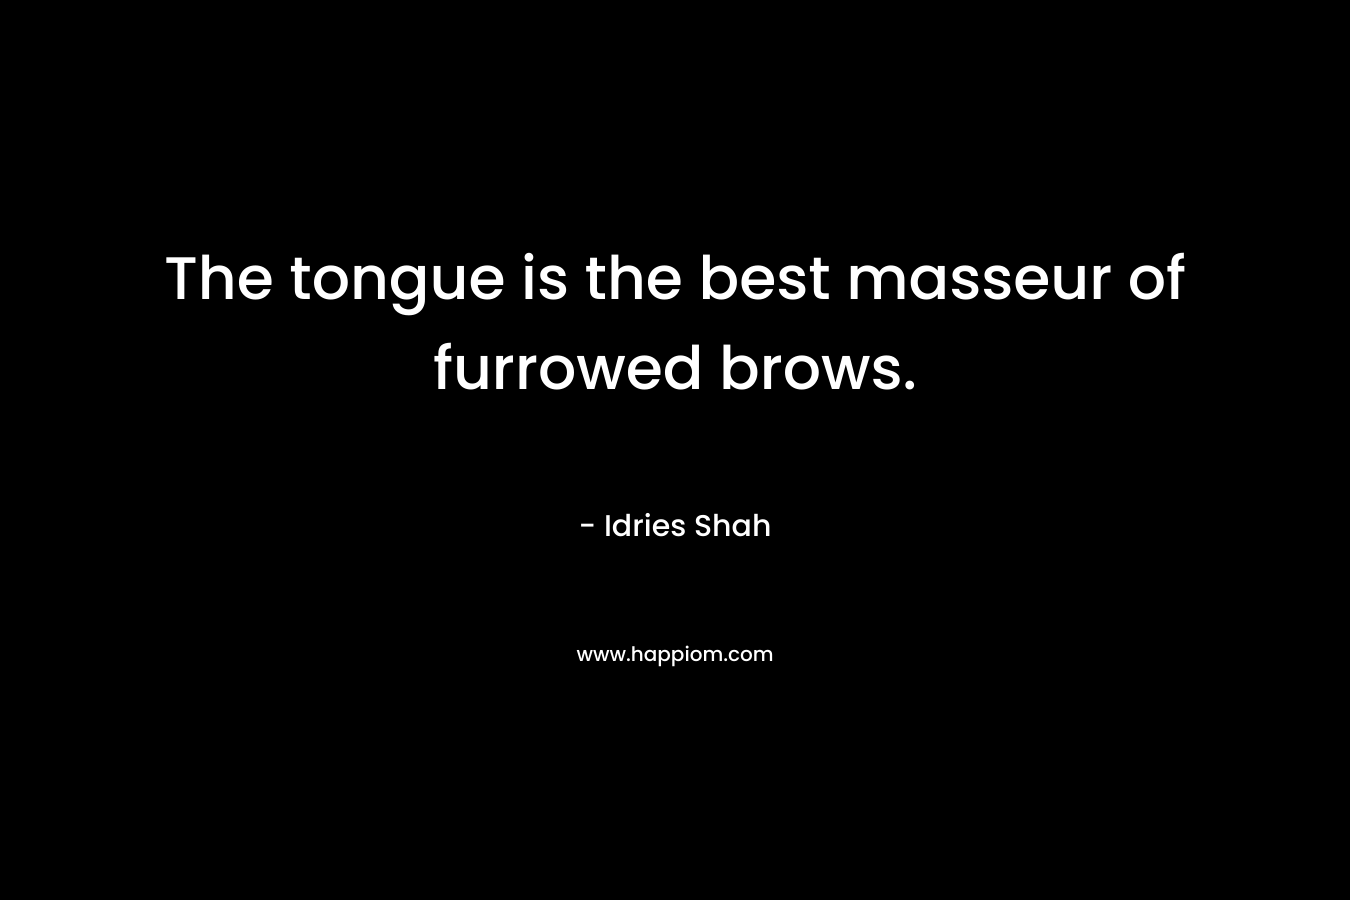 The tongue is the best masseur of furrowed brows.